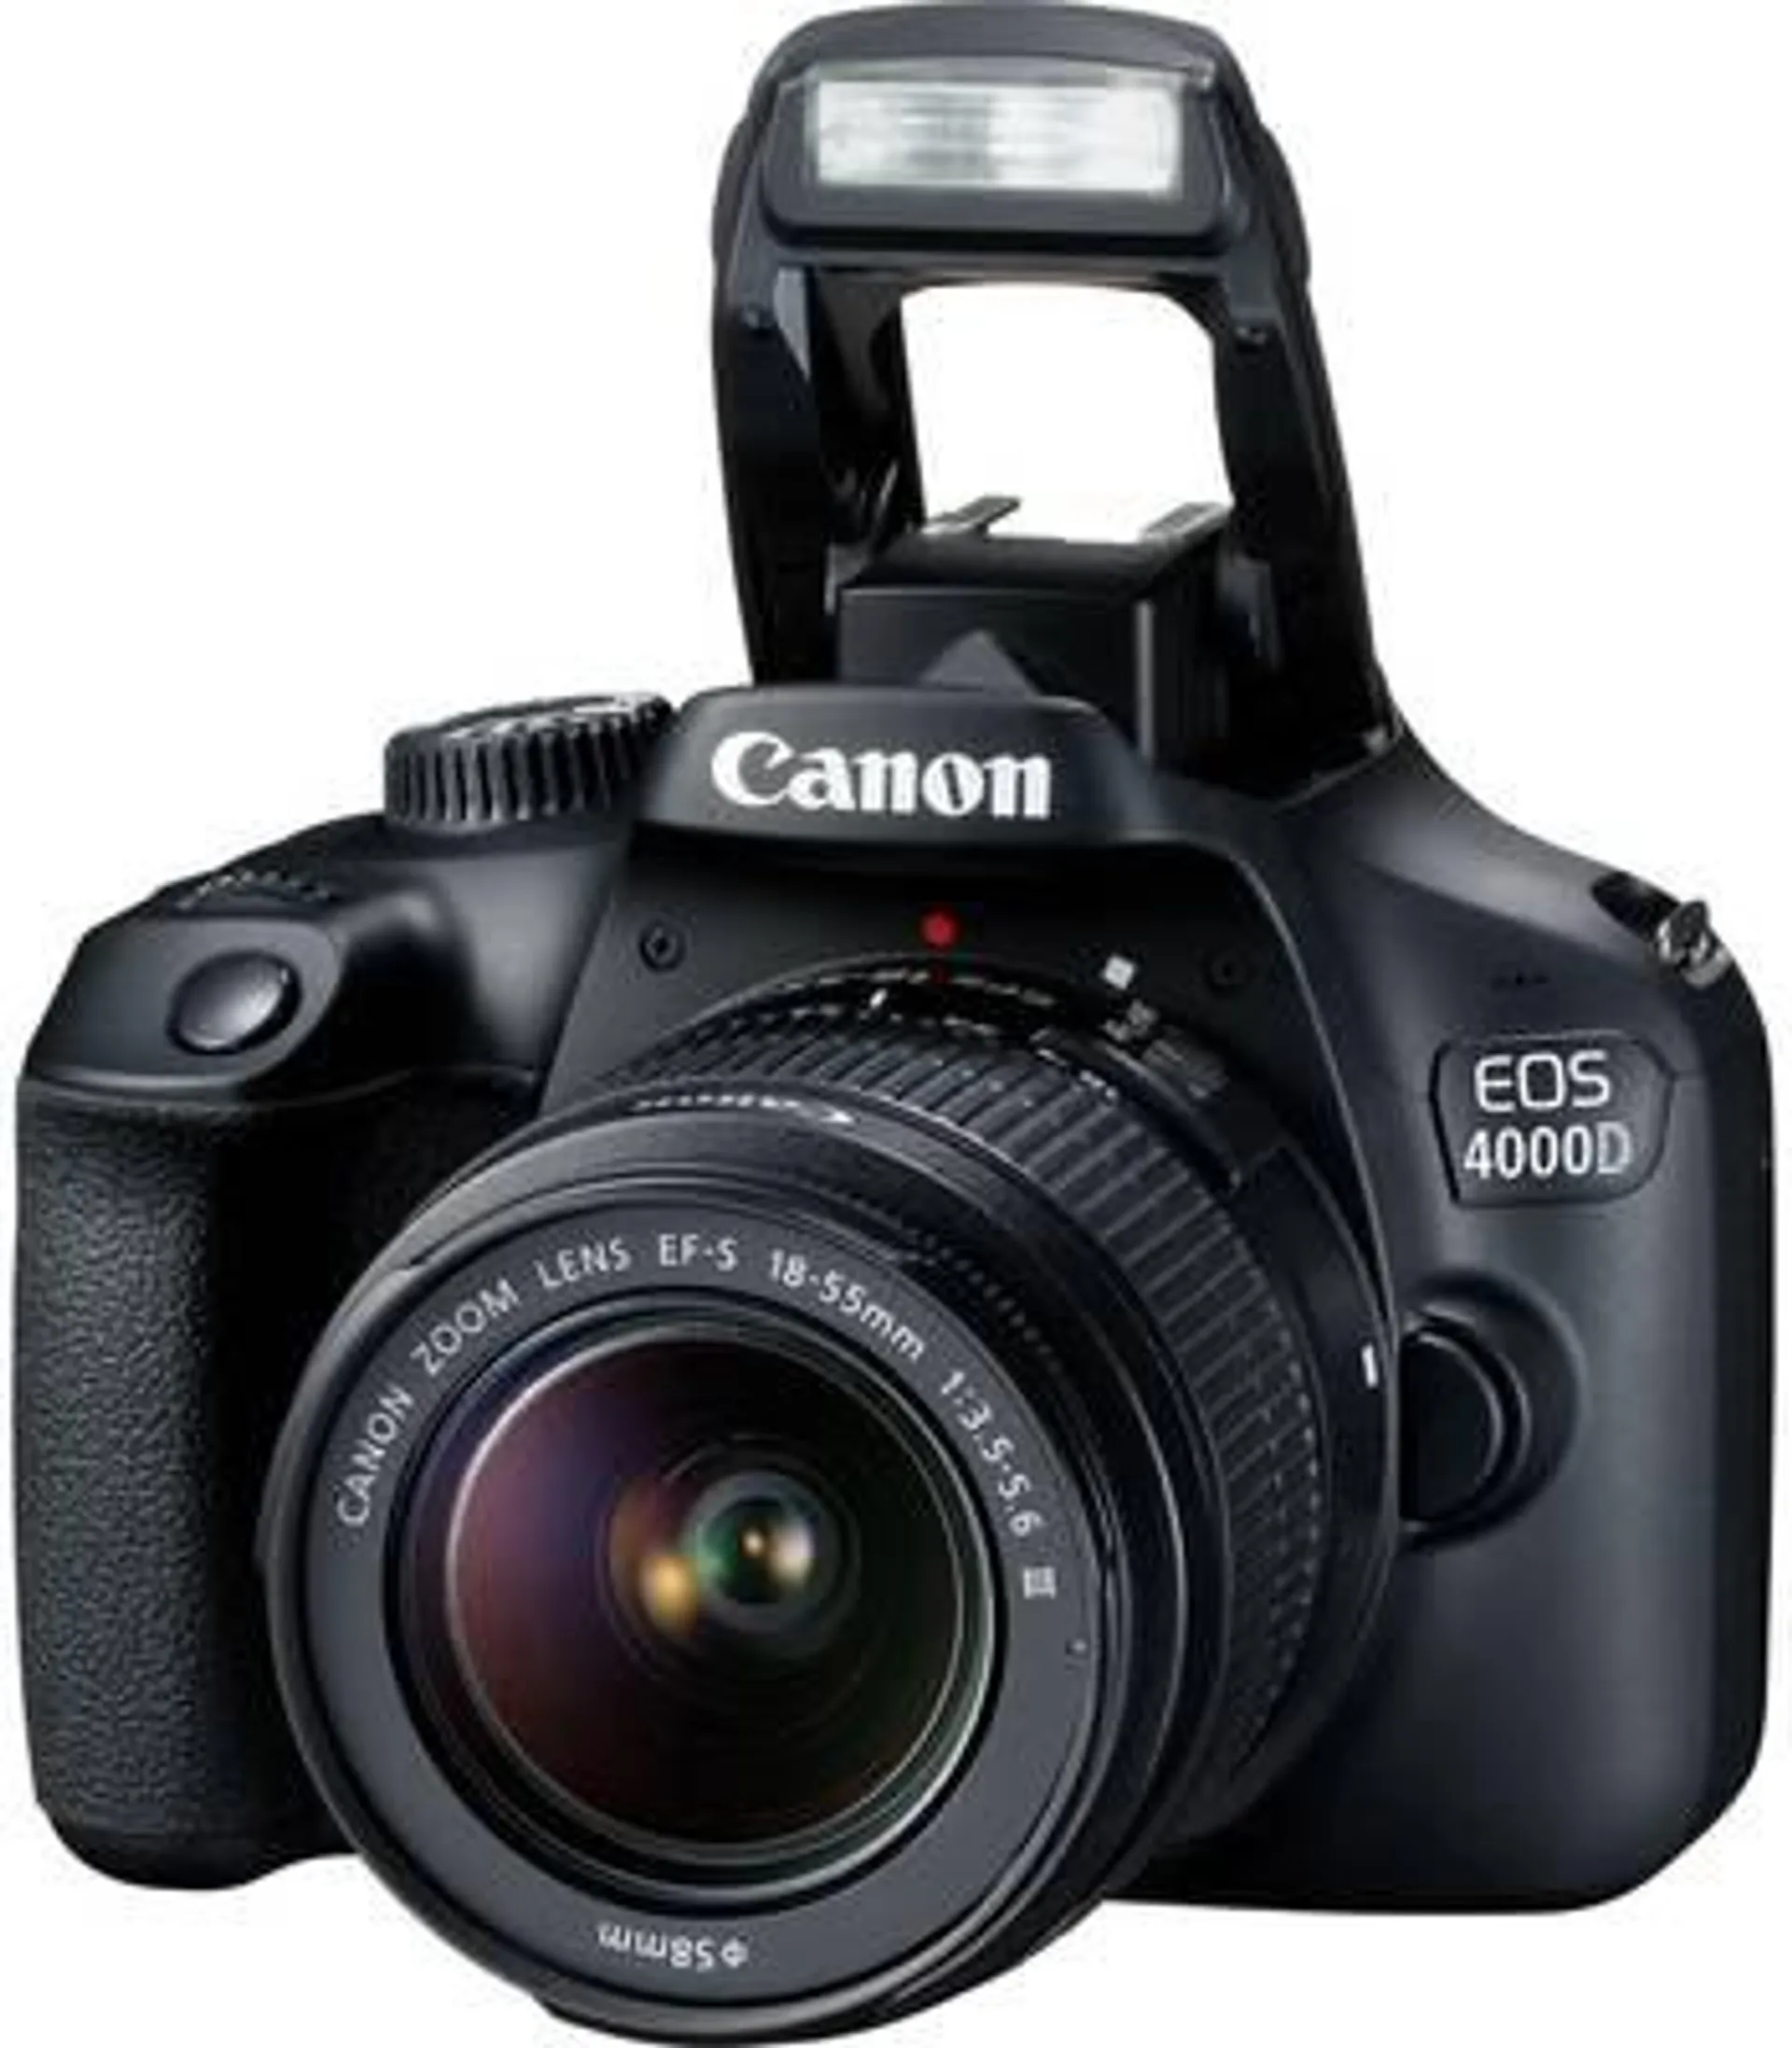 Canon EOS 4000D Kit 18-55mm III DSLR camera EF-S 18-55 mm IS II 18 MP Black Optical viewfinder, Built-in flash, Wi-Fi, F